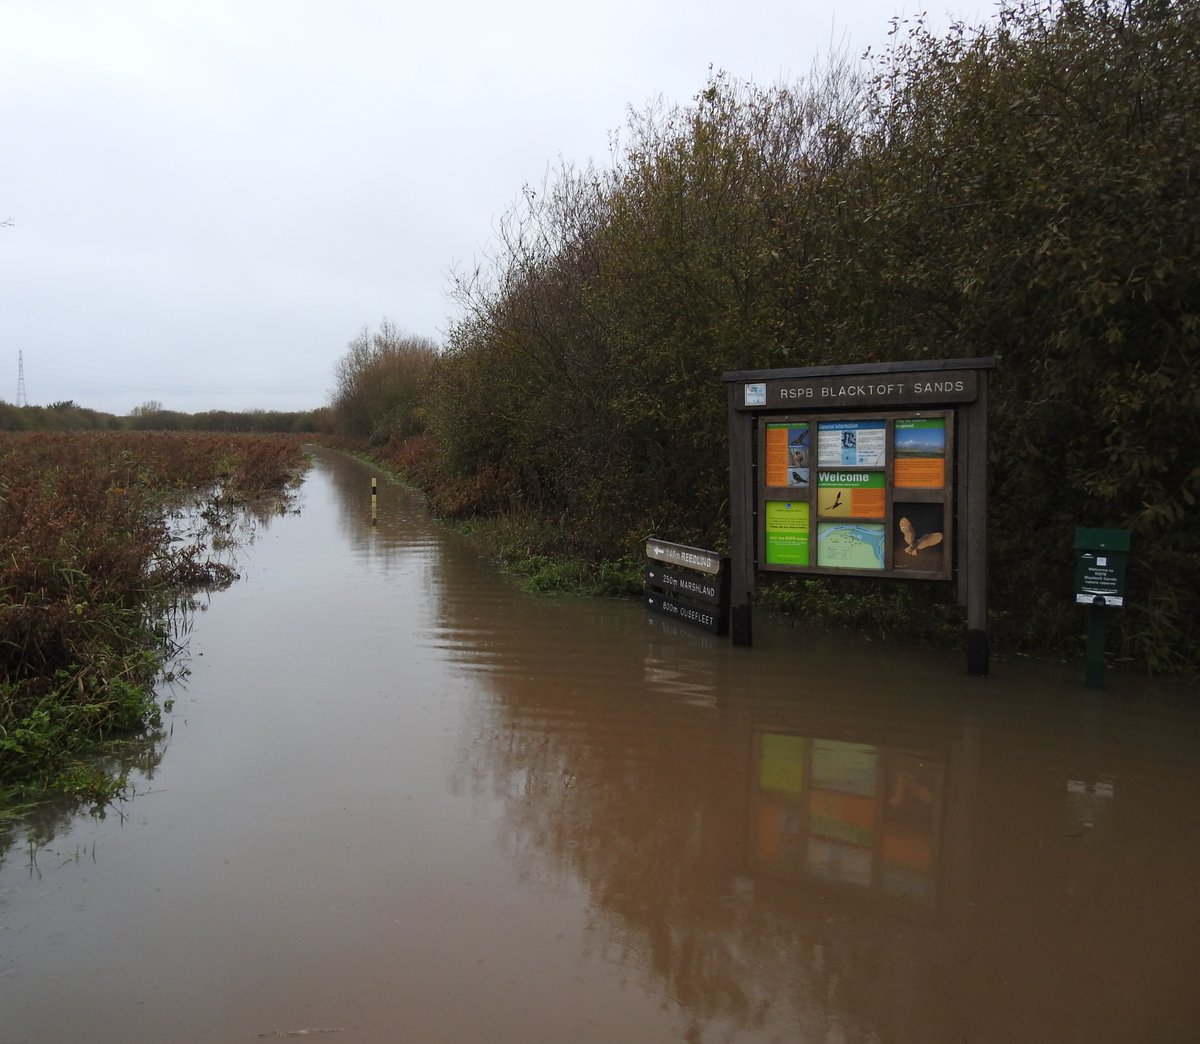 3rd big tide in as many days today impounded by a huge freshwater flow down the river means we are still well and truly flooded with the reserve closed until the water relents. Floodplain doing what it should but wish it could not do it quite so much at the moment! @humbernature